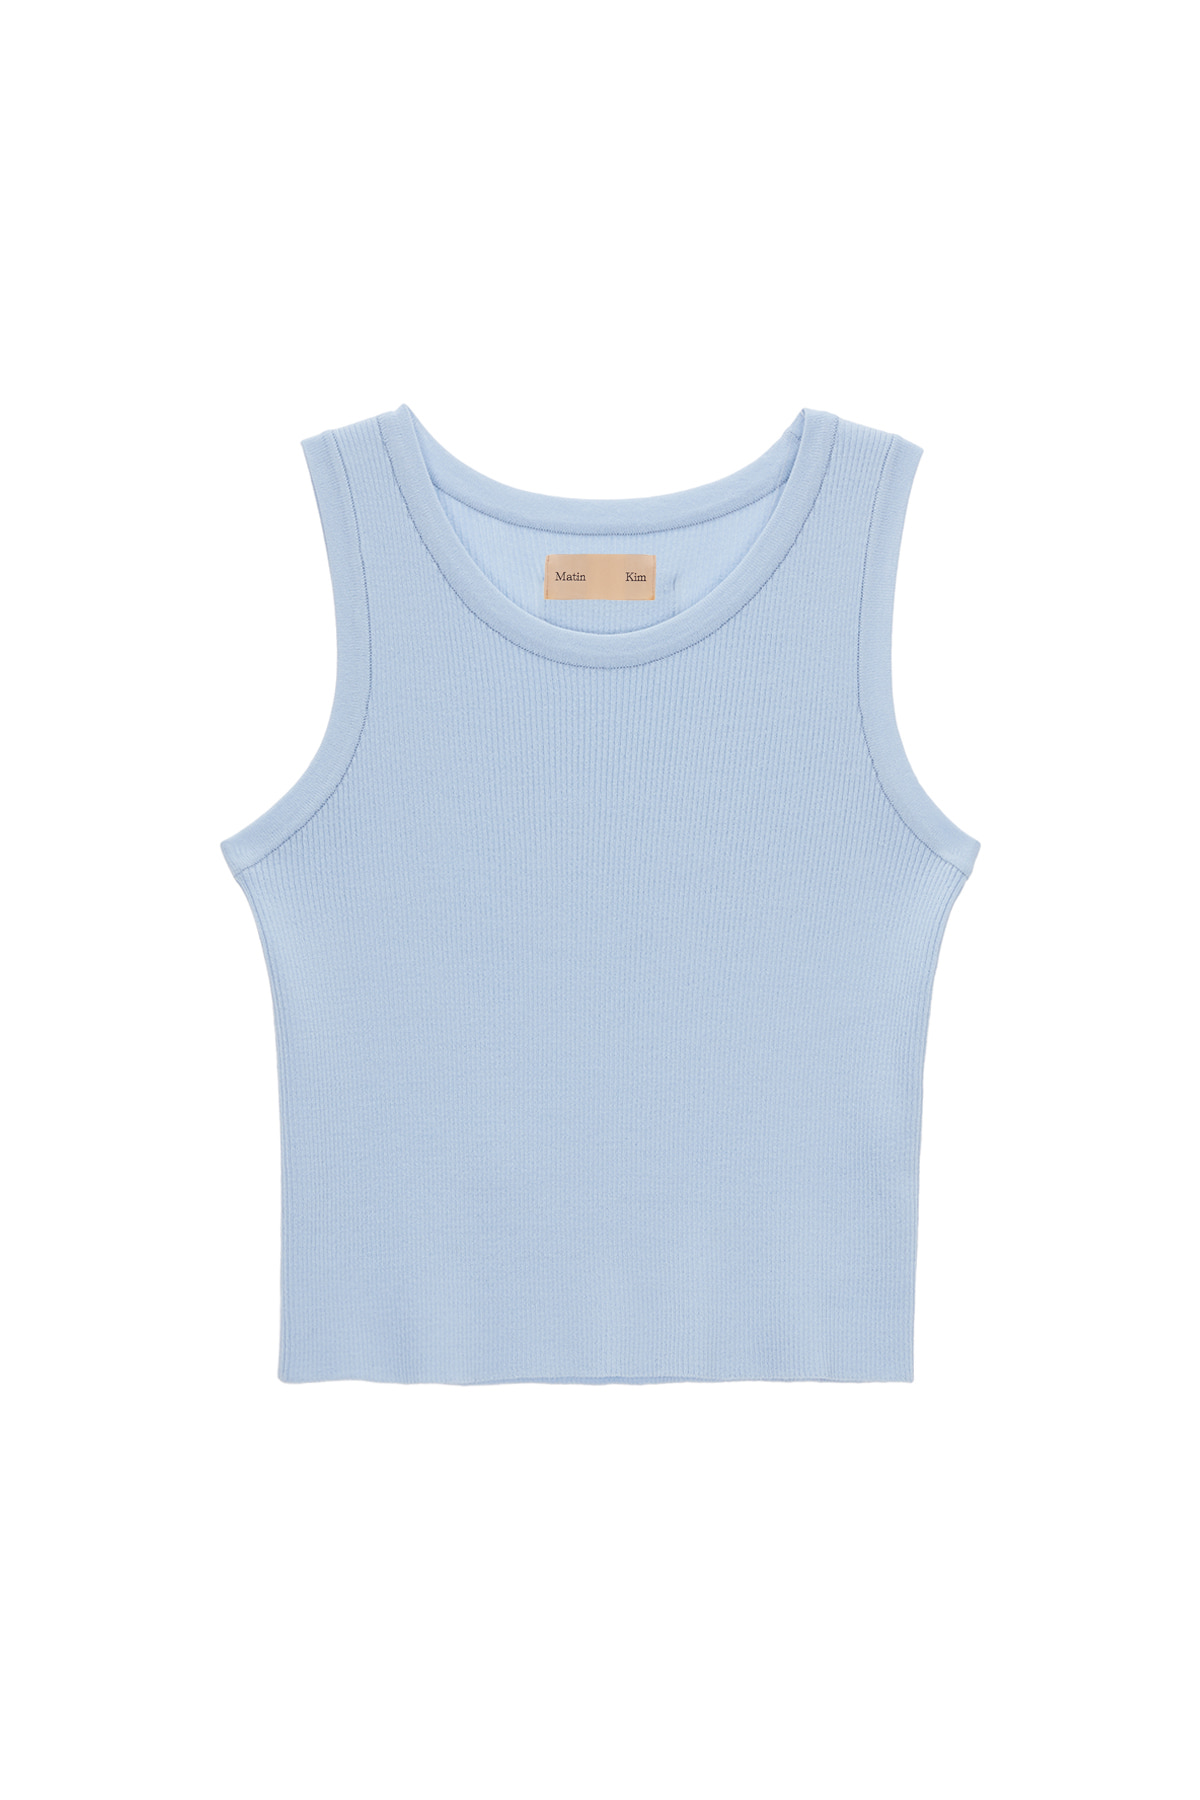 AIRY SLEEVELESS KNIT TOP IN SKY